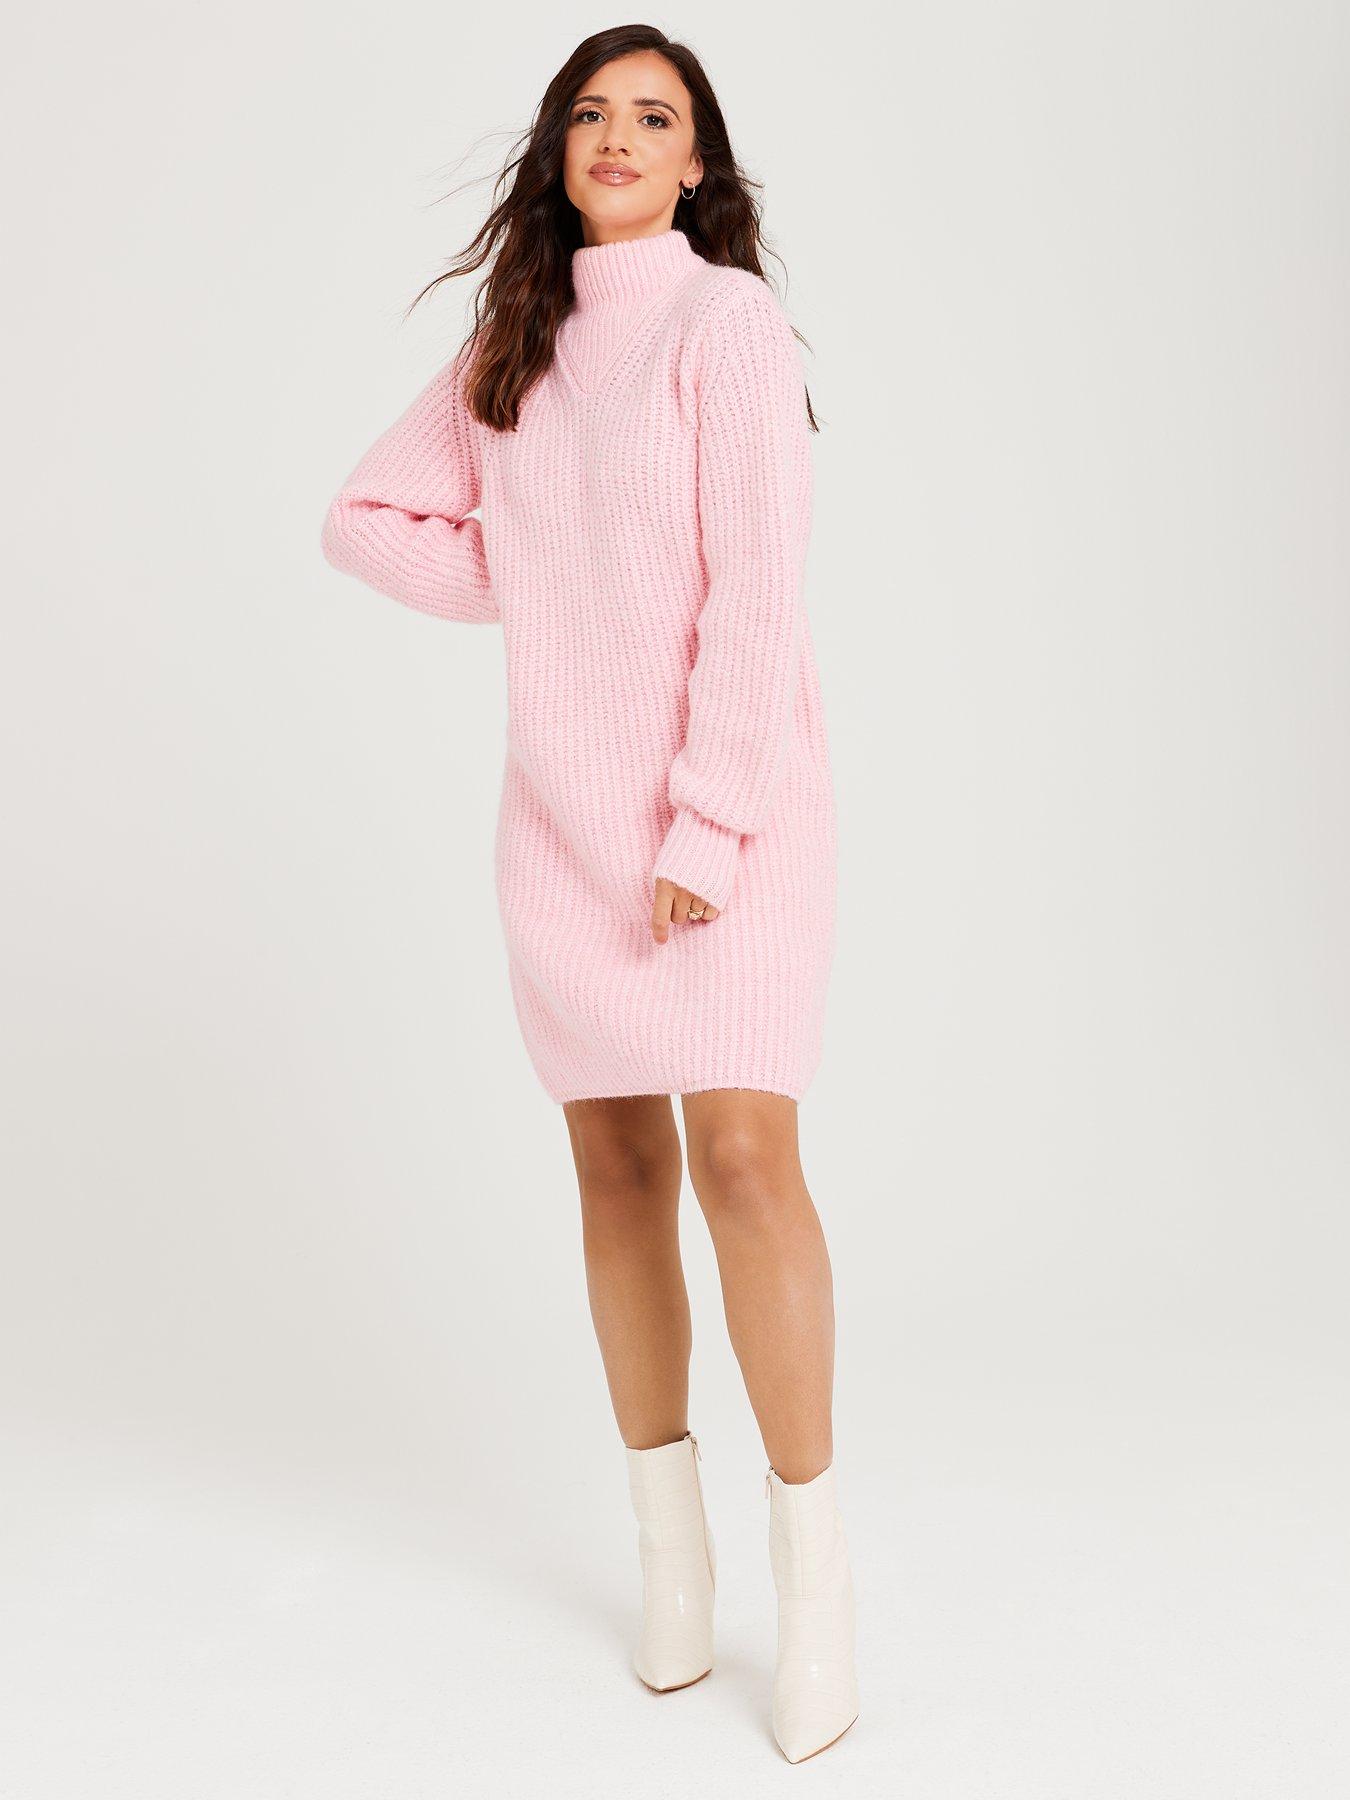 Lucy Mecklenburgh x V by Very High Neck Loose Jumper Dress - Pink